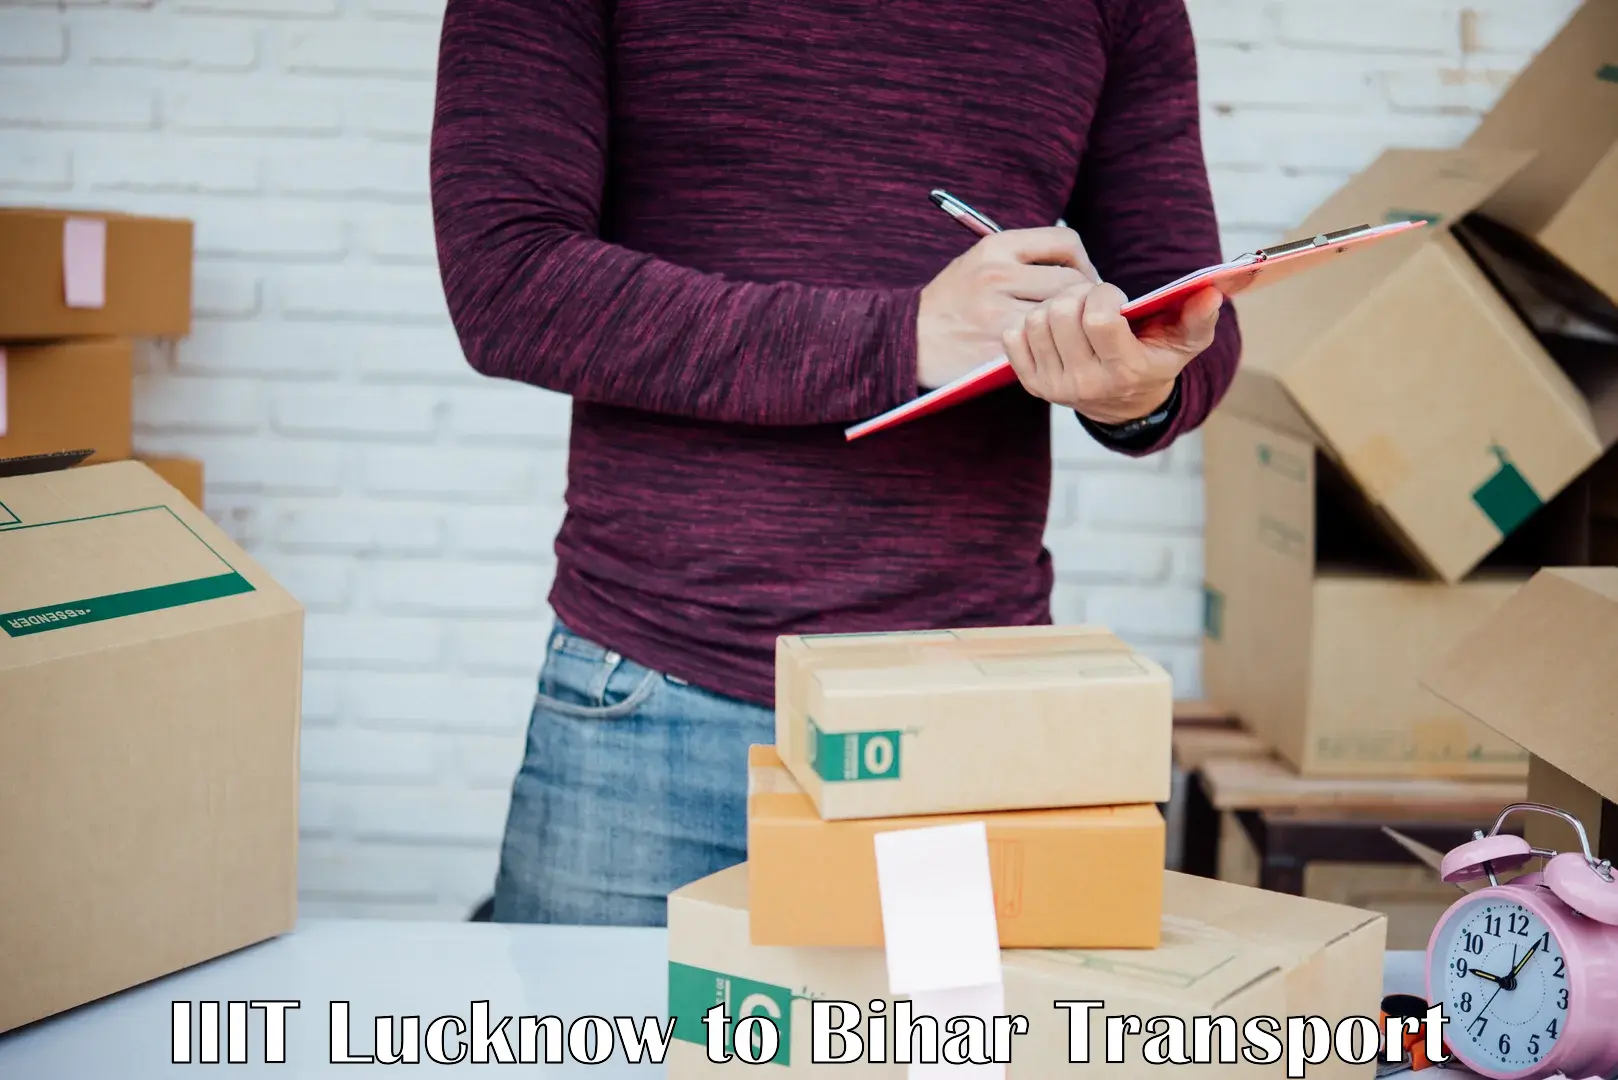 Domestic goods transportation services IIIT Lucknow to Maheshkhunt